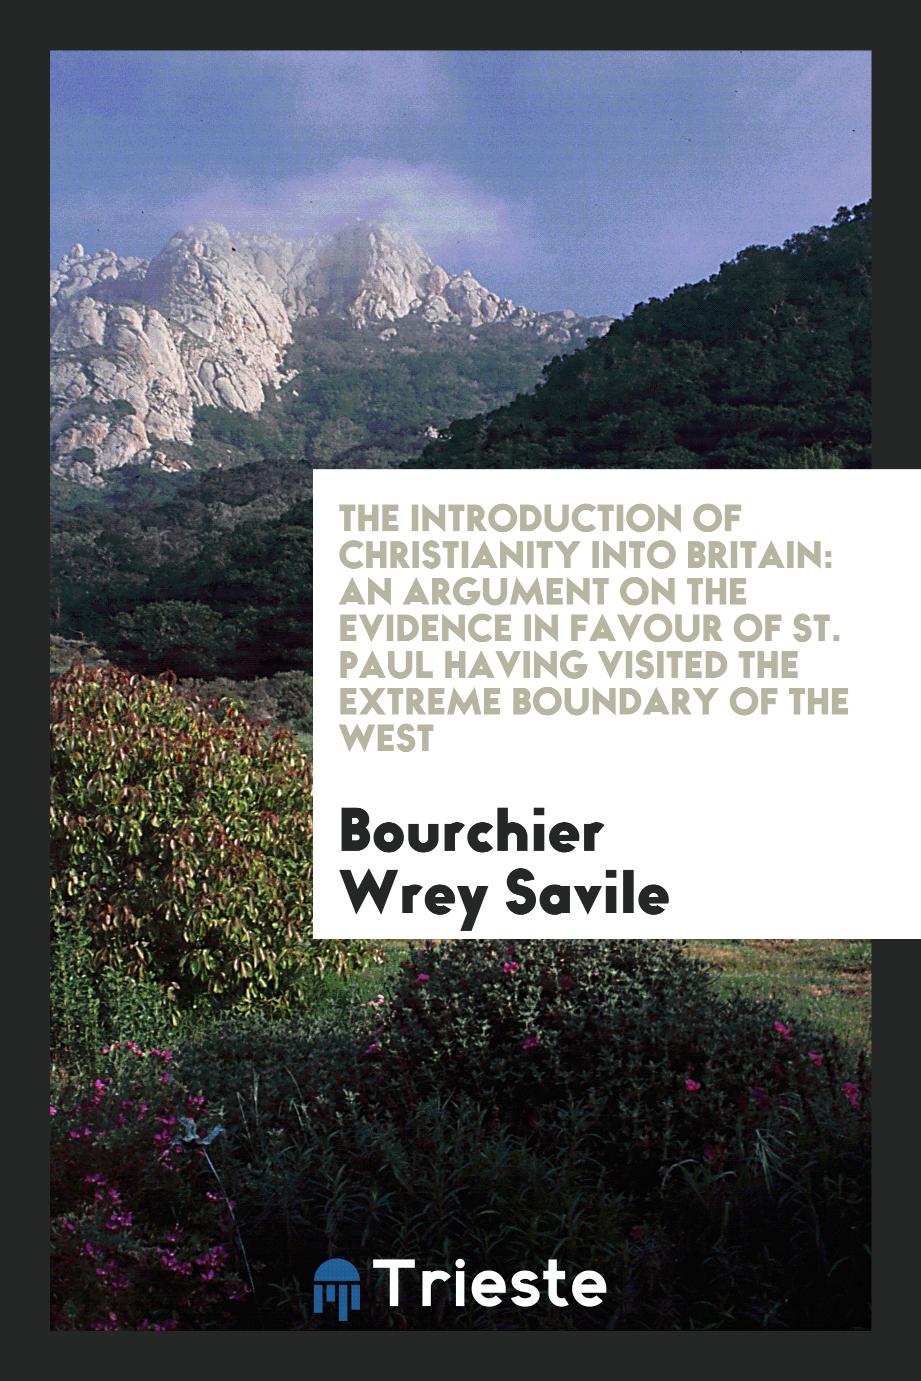 The introduction of Christianity into Britain: an argument on the evidence in favour of St. Paul having visited the extreme boundary of the west